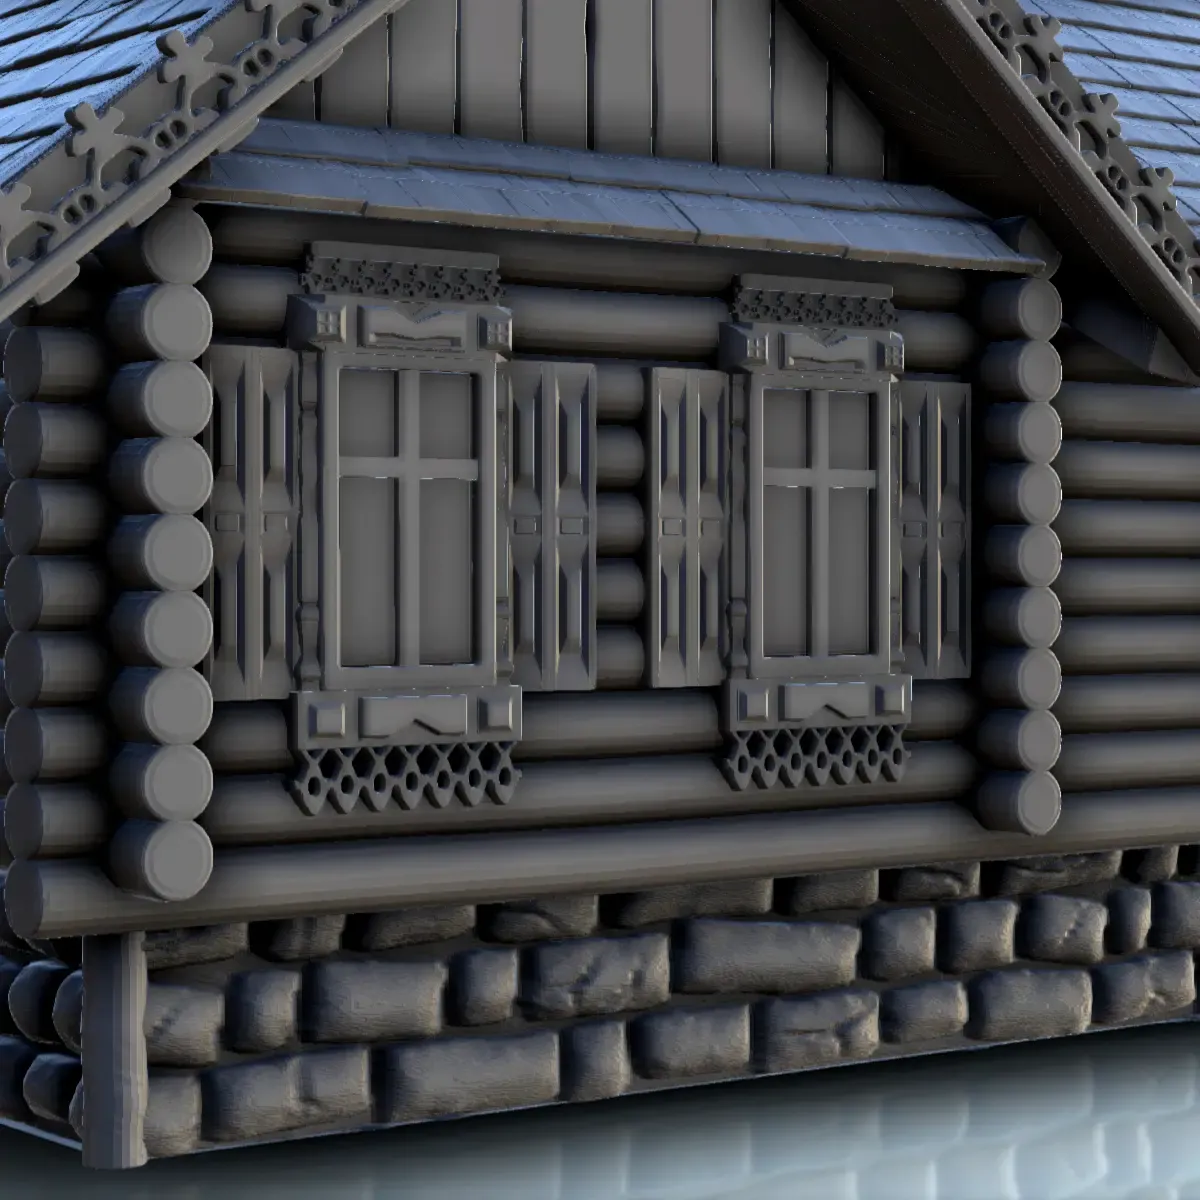 Slavic log house with two access doors and canopies (19) - m